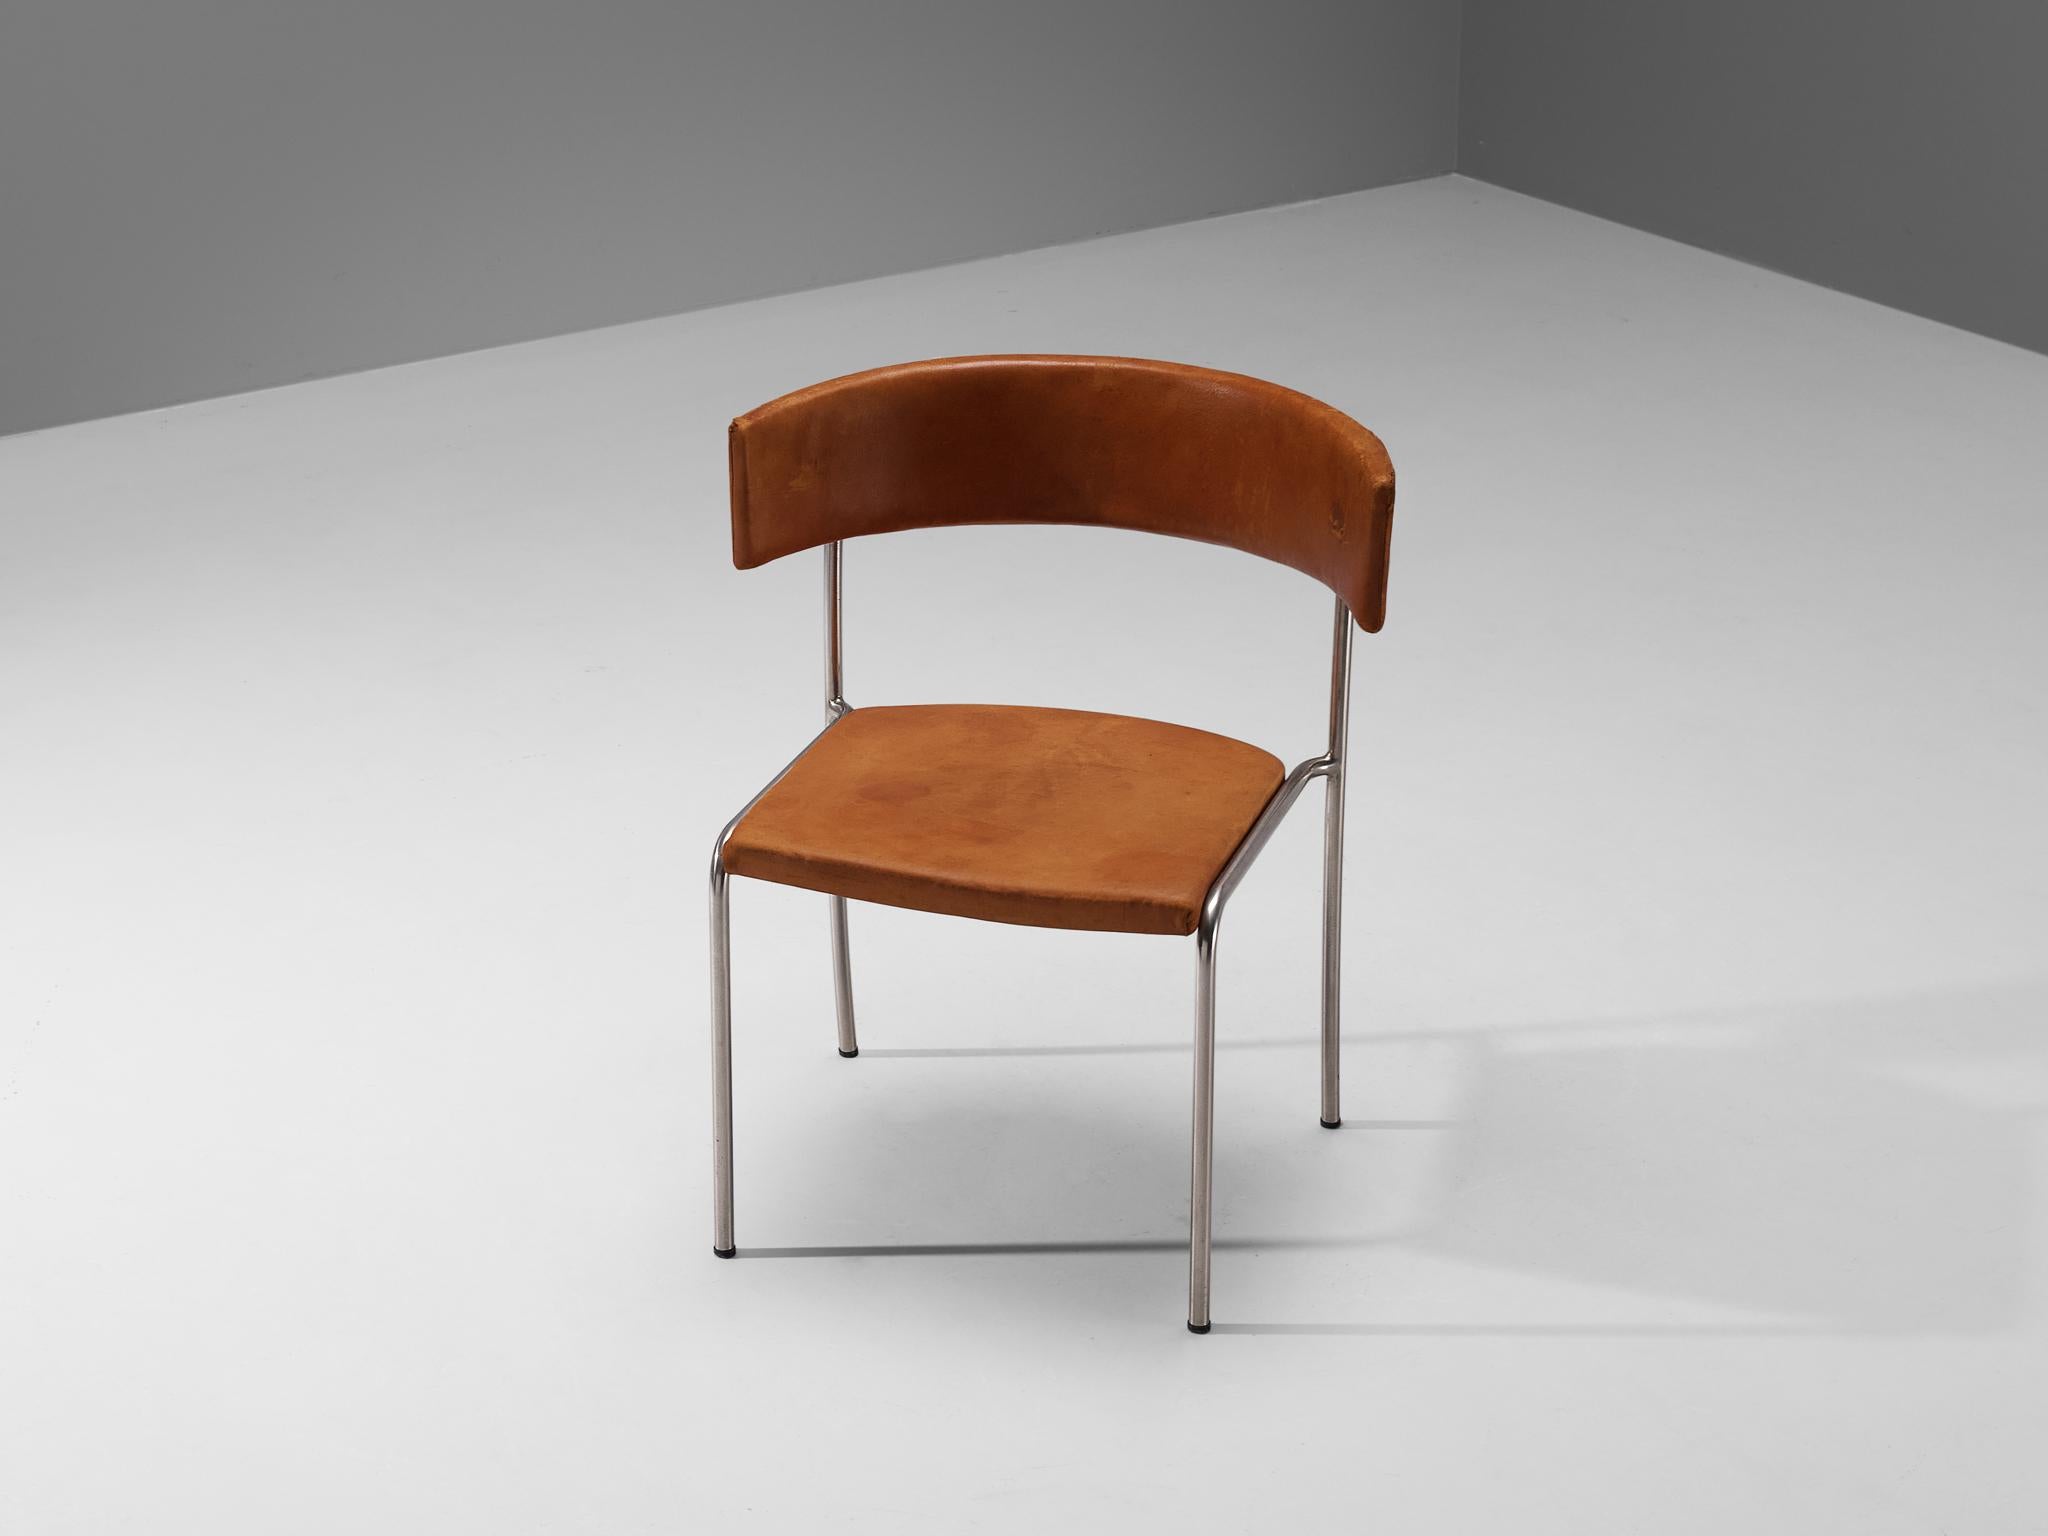 Erik Karlström, side chair, chromed steel, leather, Sweden, 1960s.

Elegant and modern dining chair with unusual shaped backrest designed by Erik Karlström. This chair was made in the 1960s and has a very contemporary appearance. The large backrest